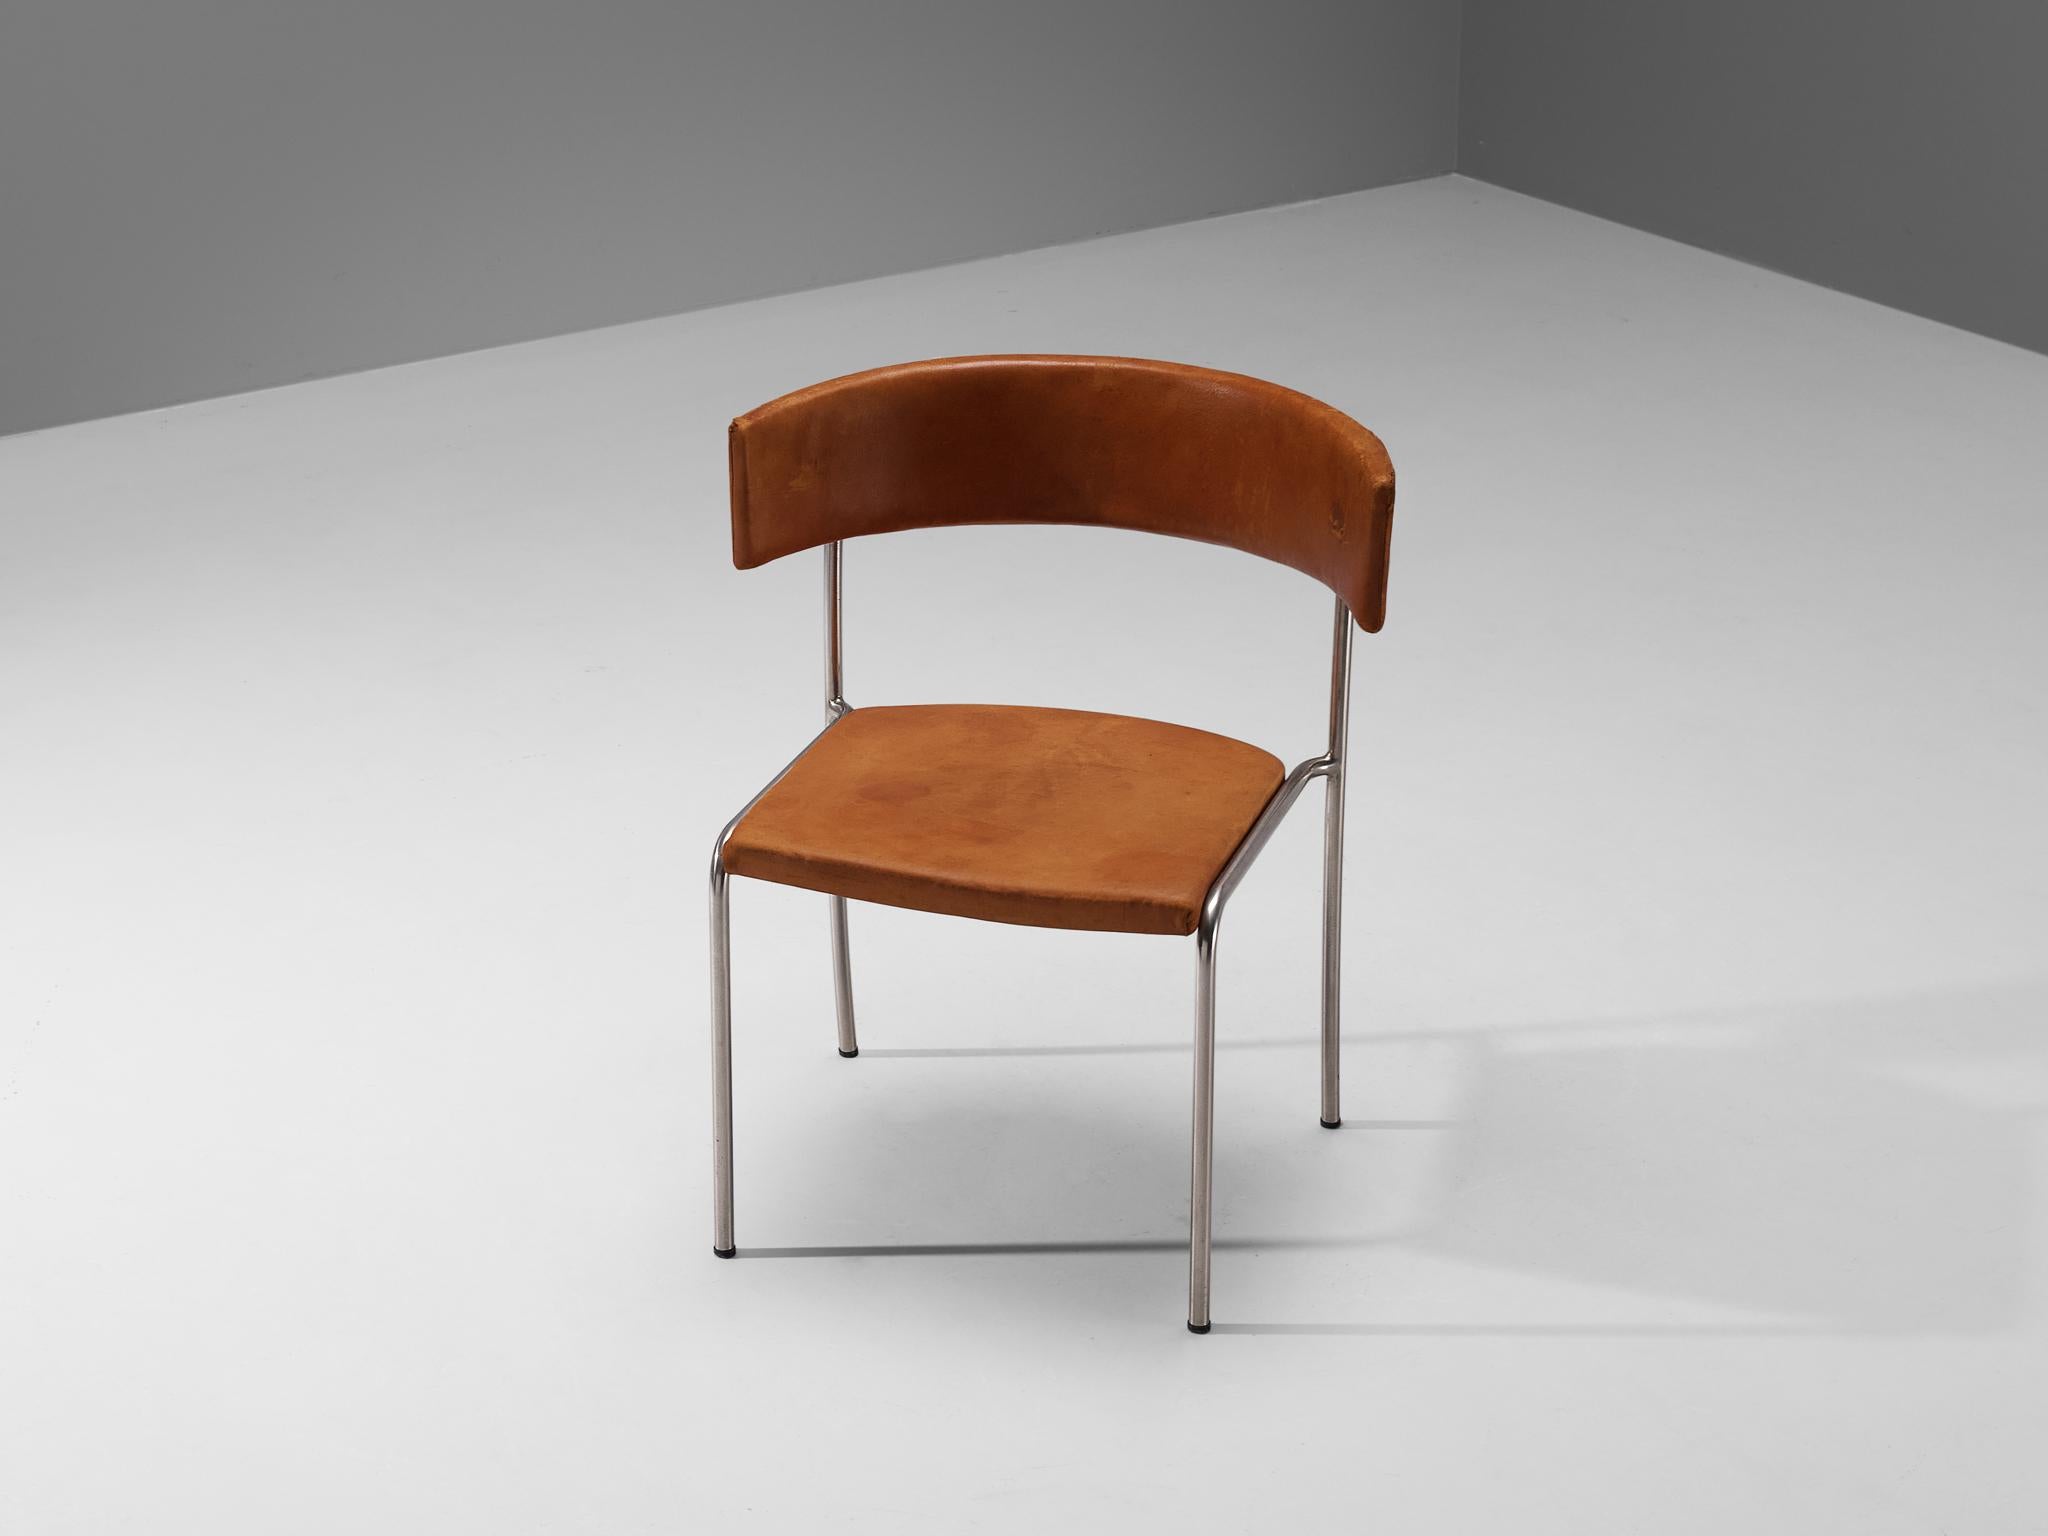 Erik Karlström, side chair, chromed steel, leather, Sweden, 1960s.

Elegant and modern dining chair with unusual shaped backrest designed by Erik Karlström. This chair was made in the 1960s and has a very contemporary appearance. The large backrest